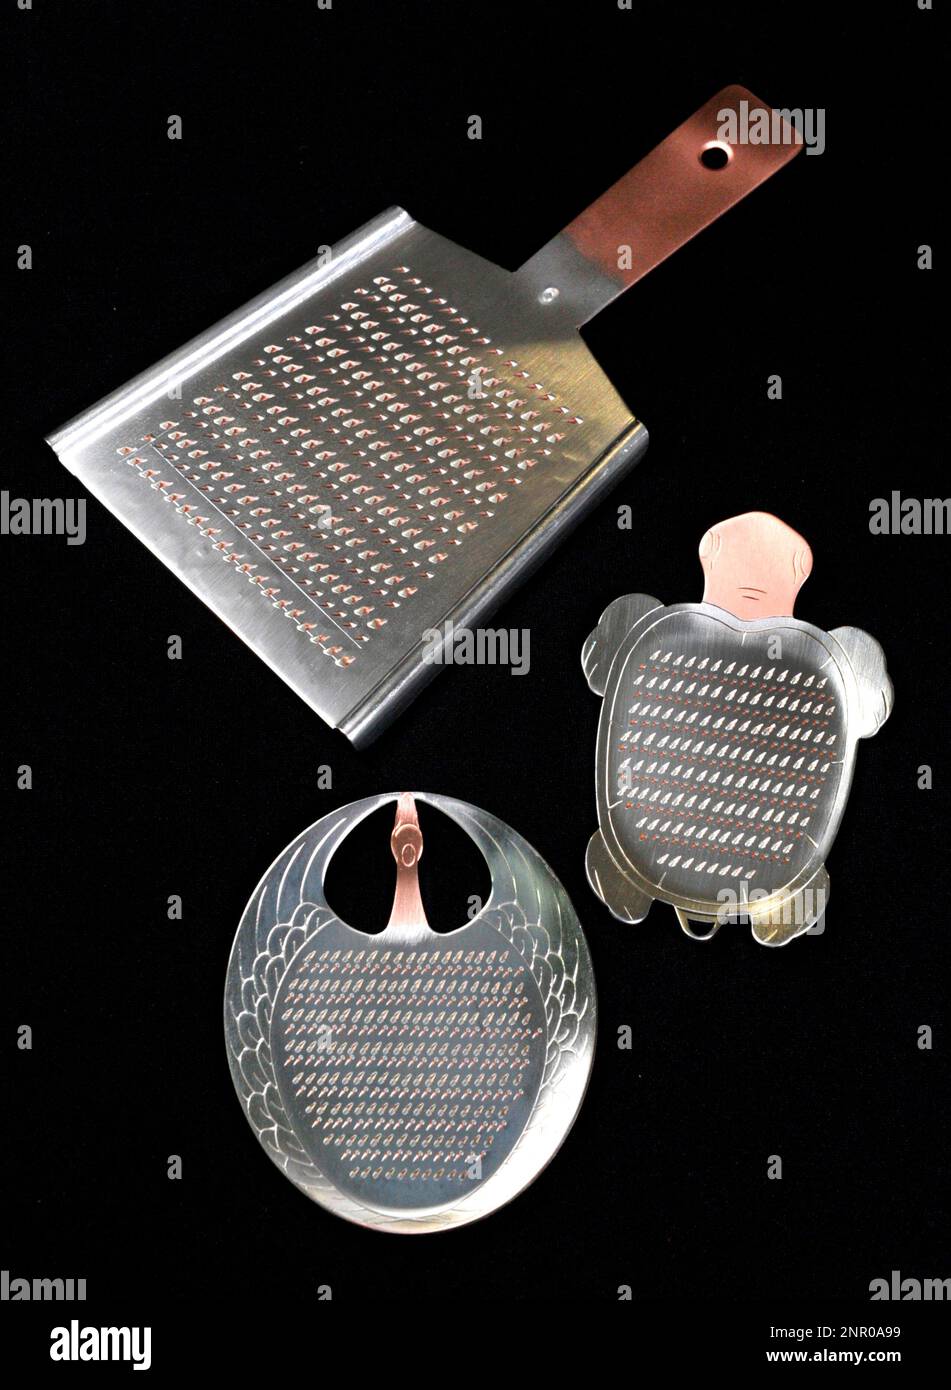 https://c8.alamy.com/comp/2NR0A99/a-picture-shows-japanese-grater-oroshigane-and-grated-japanese-radish-daikon-oroshi-in-tokyo-on-may-29-2020-the-trapezoidal-grater-is-the-traditional-japanese-grater-the-yomiuri-shimbun-via-ap-images-2NR0A99.jpg